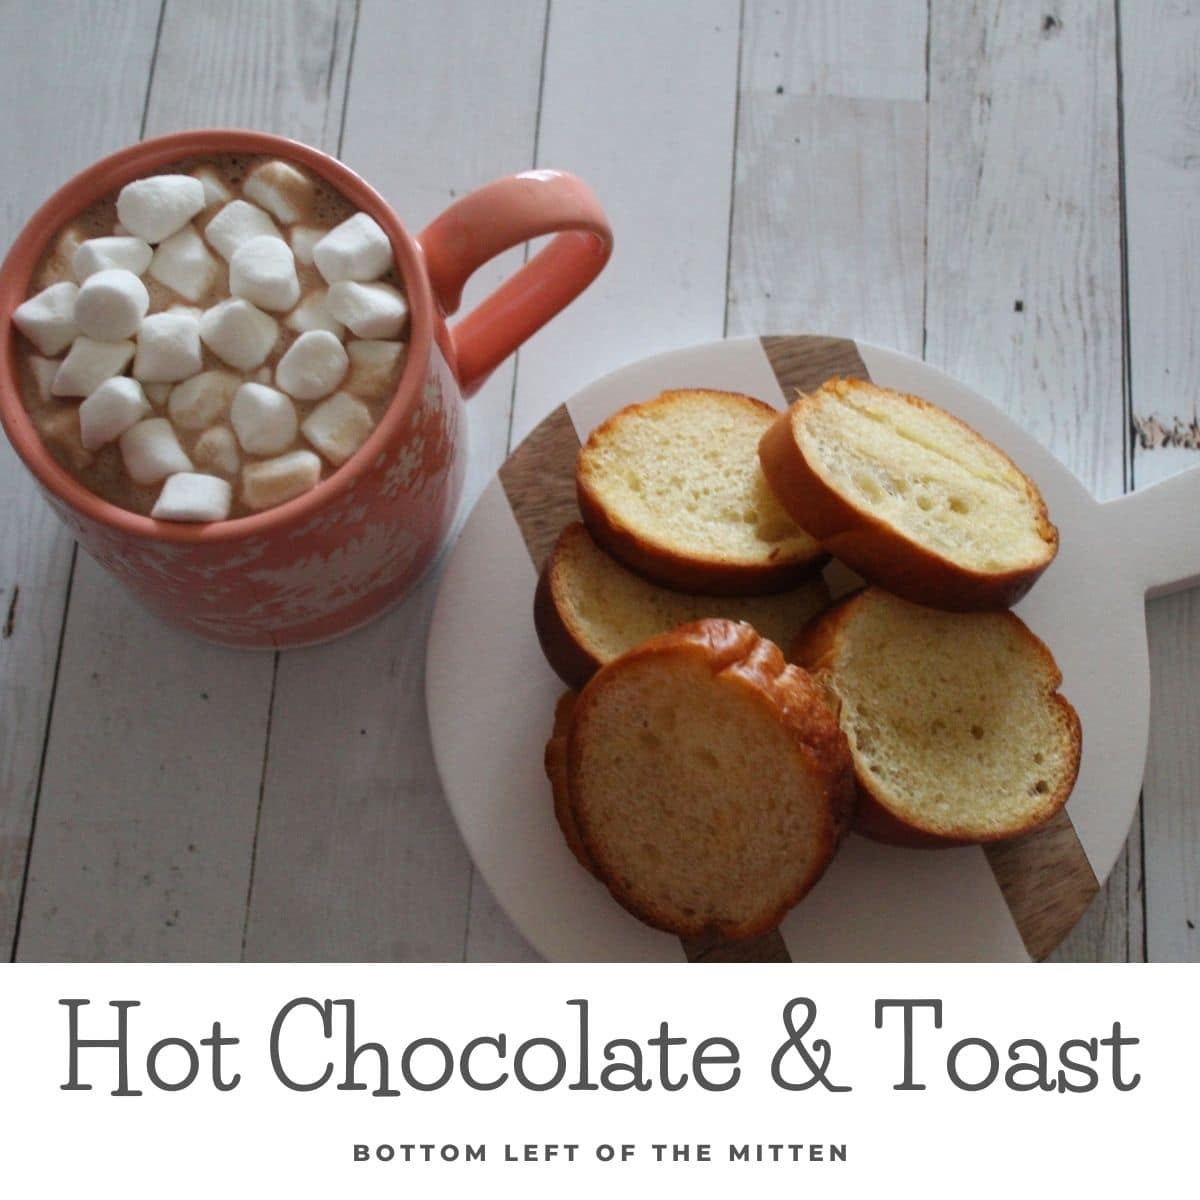 Buttered toast with a mug of hot chocolate and marhsmallows on the side.